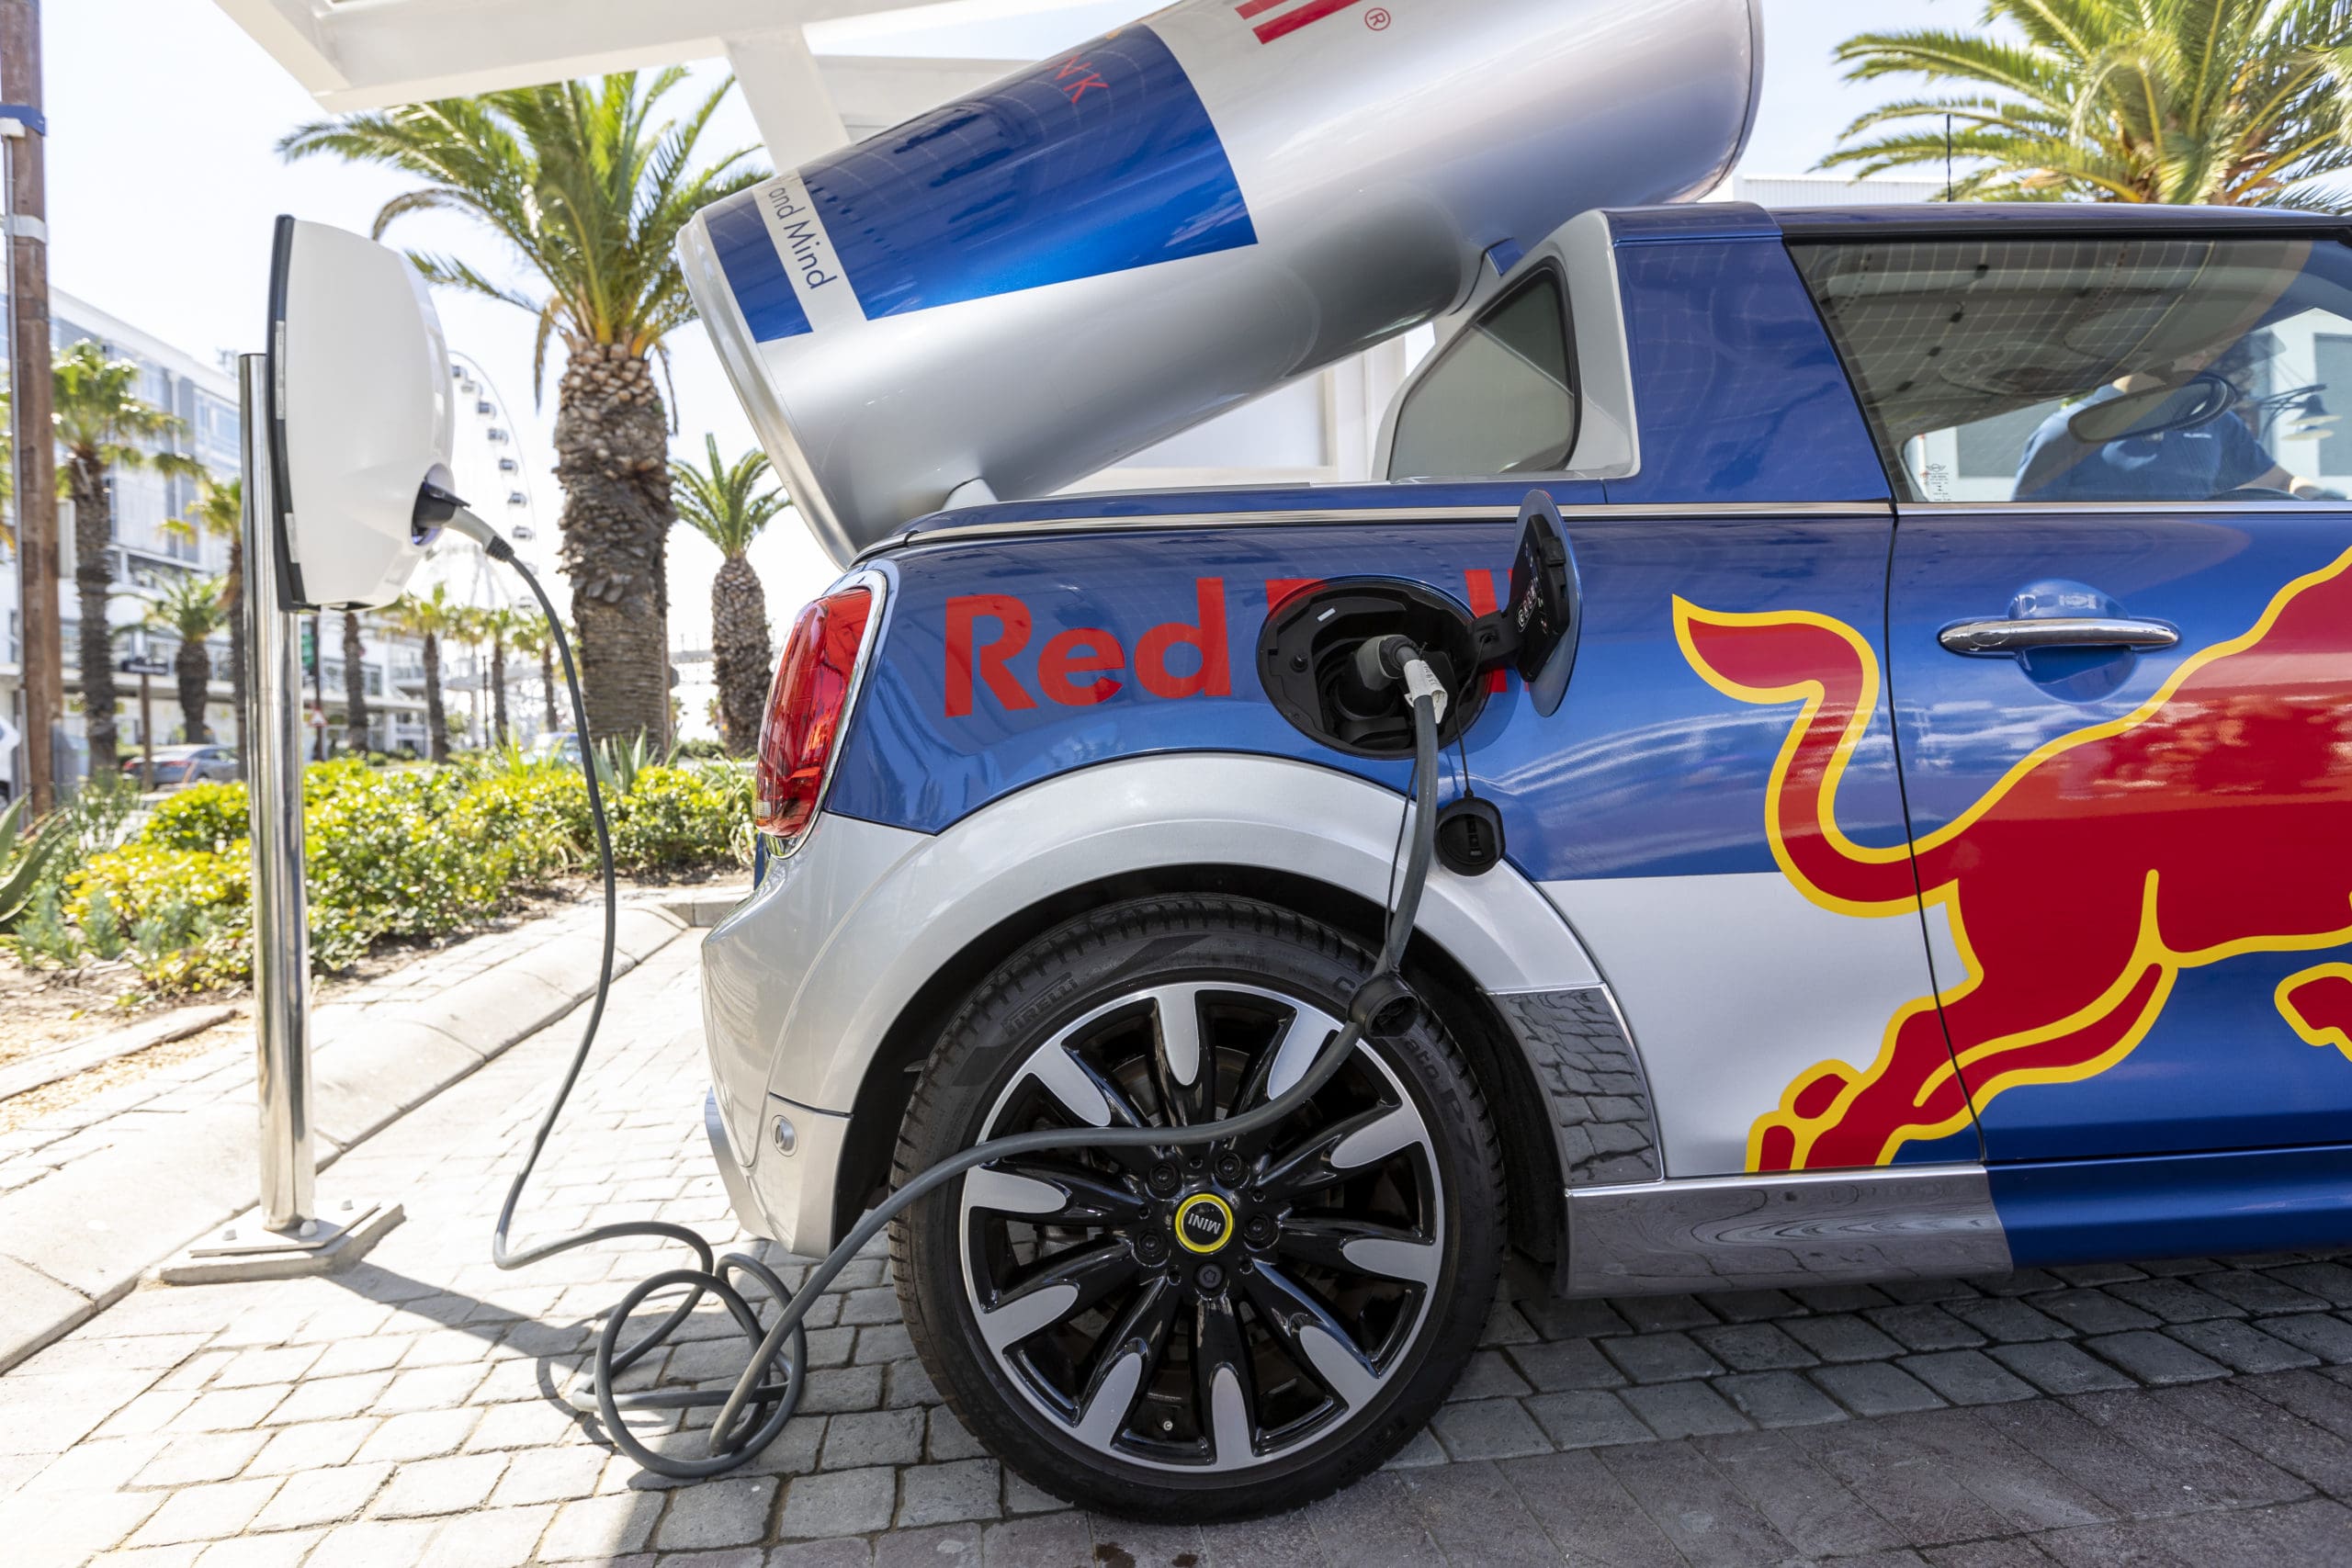 MINI and Red Bull